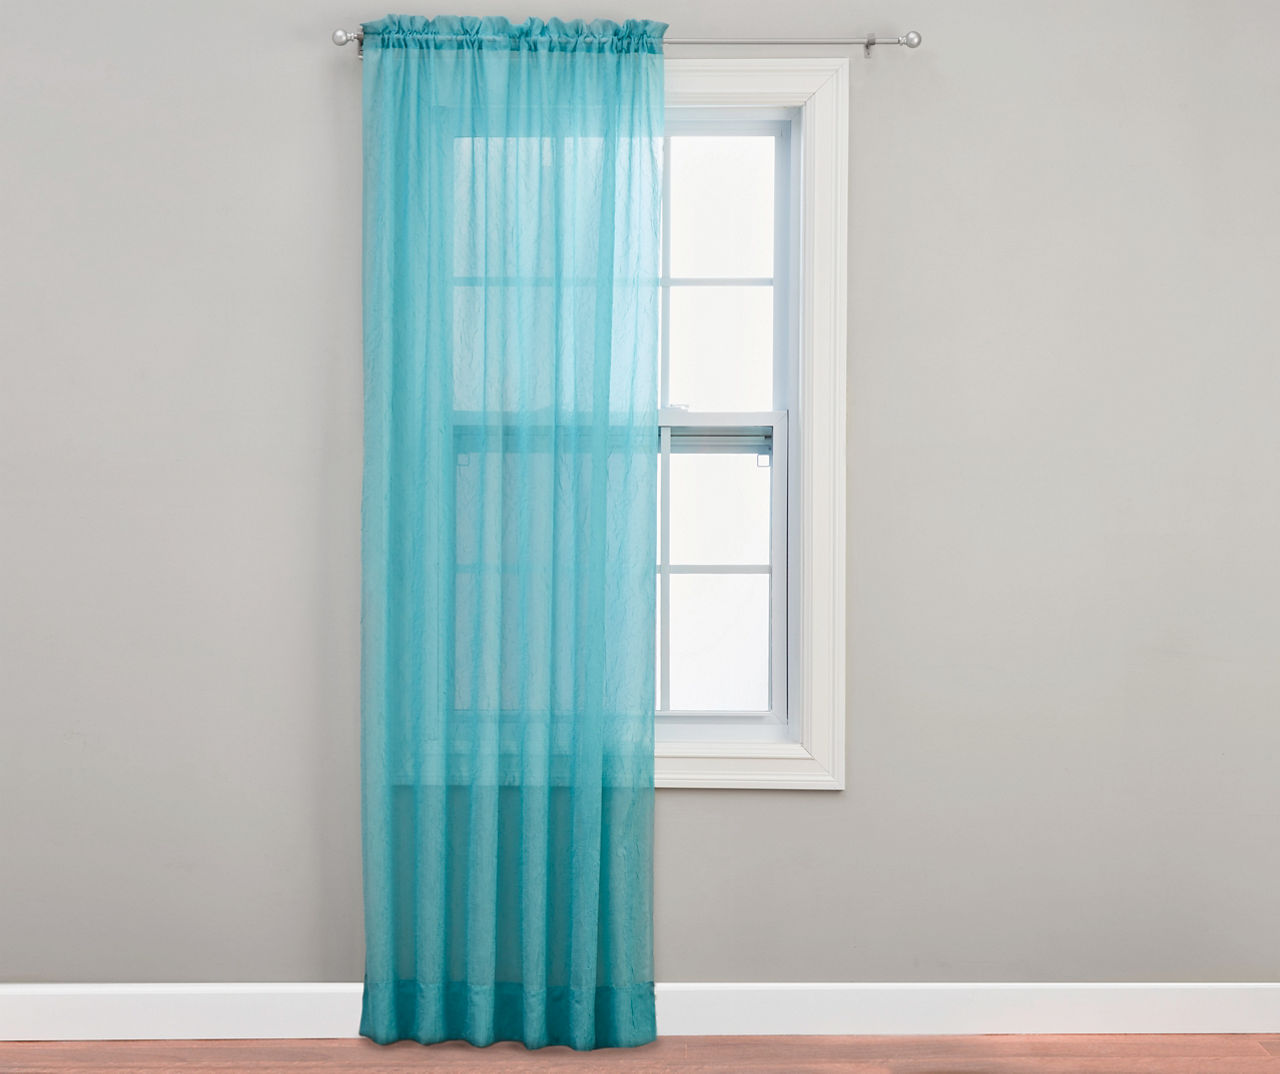 Aegean Crushed Voile Sheer Curtain Panel, (84")